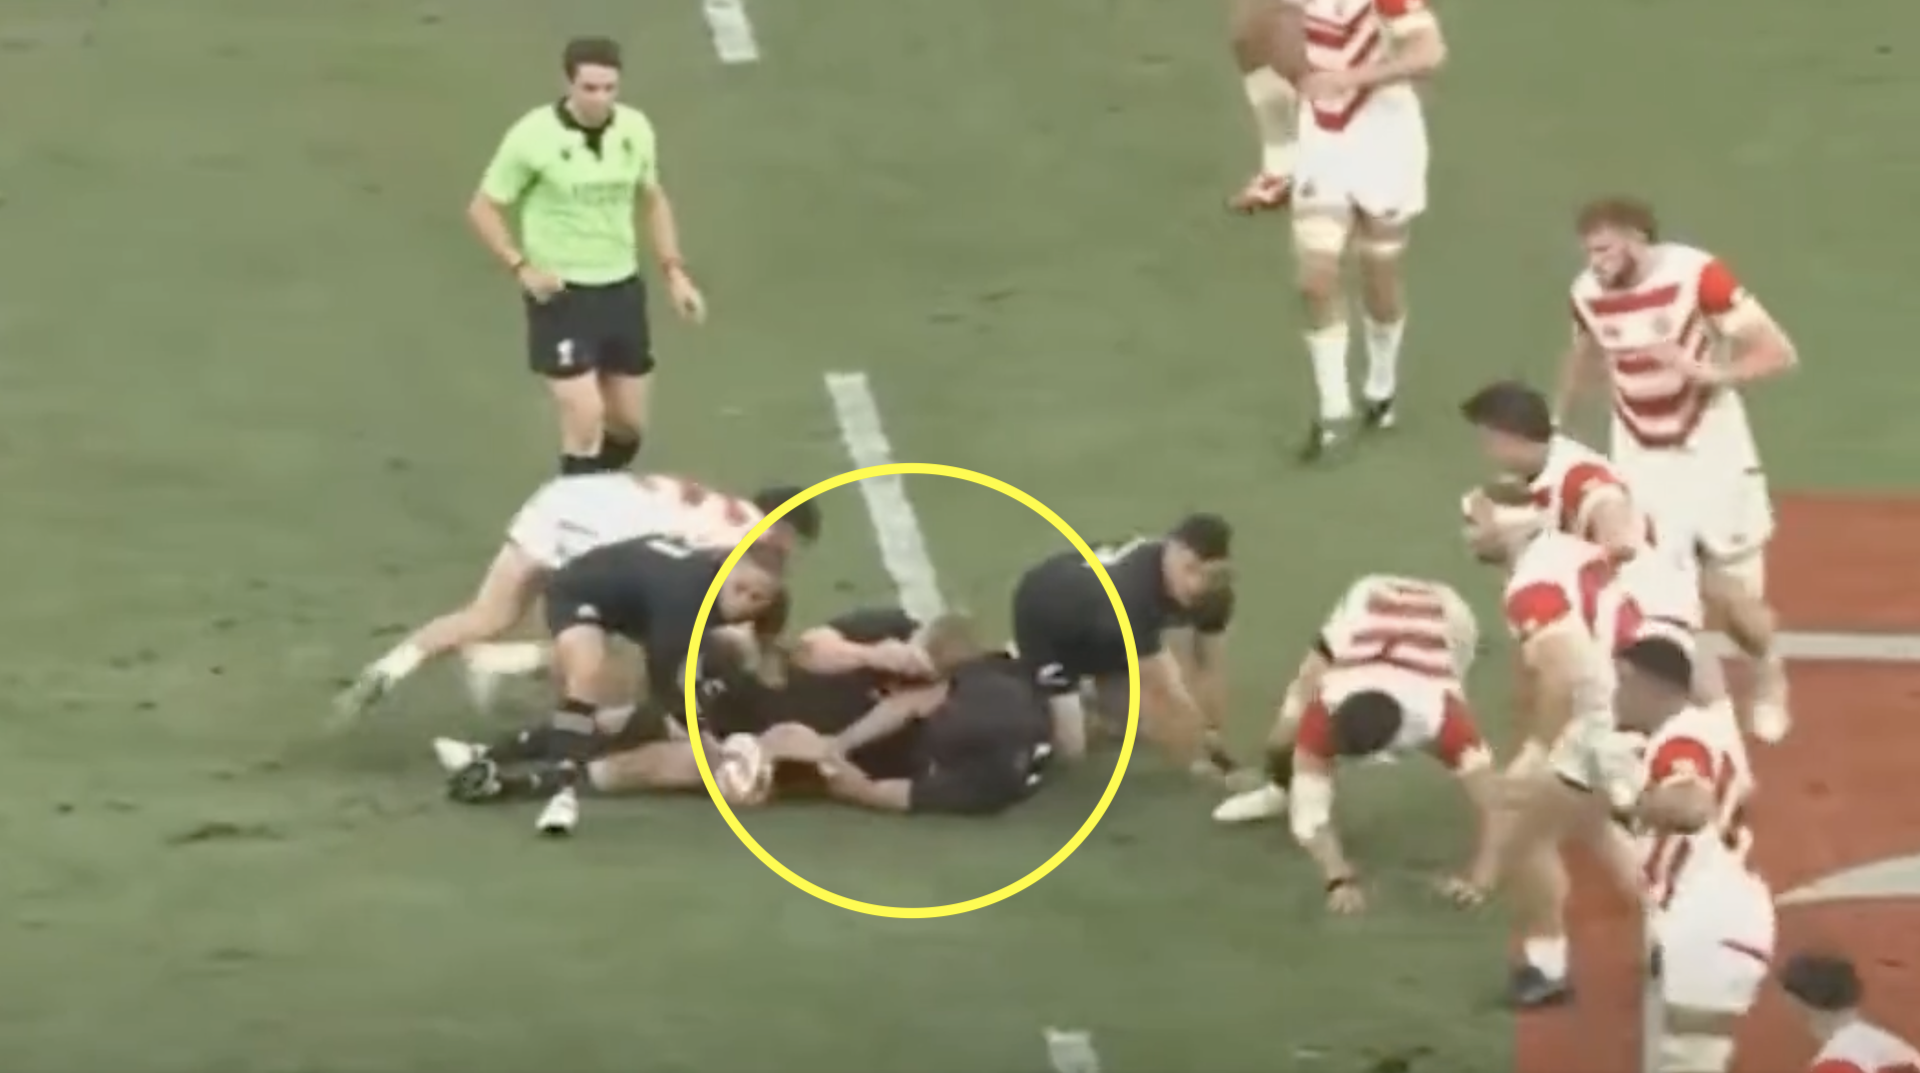 Sam Cane's controversial clearout that resulted in double cheekbone fracture